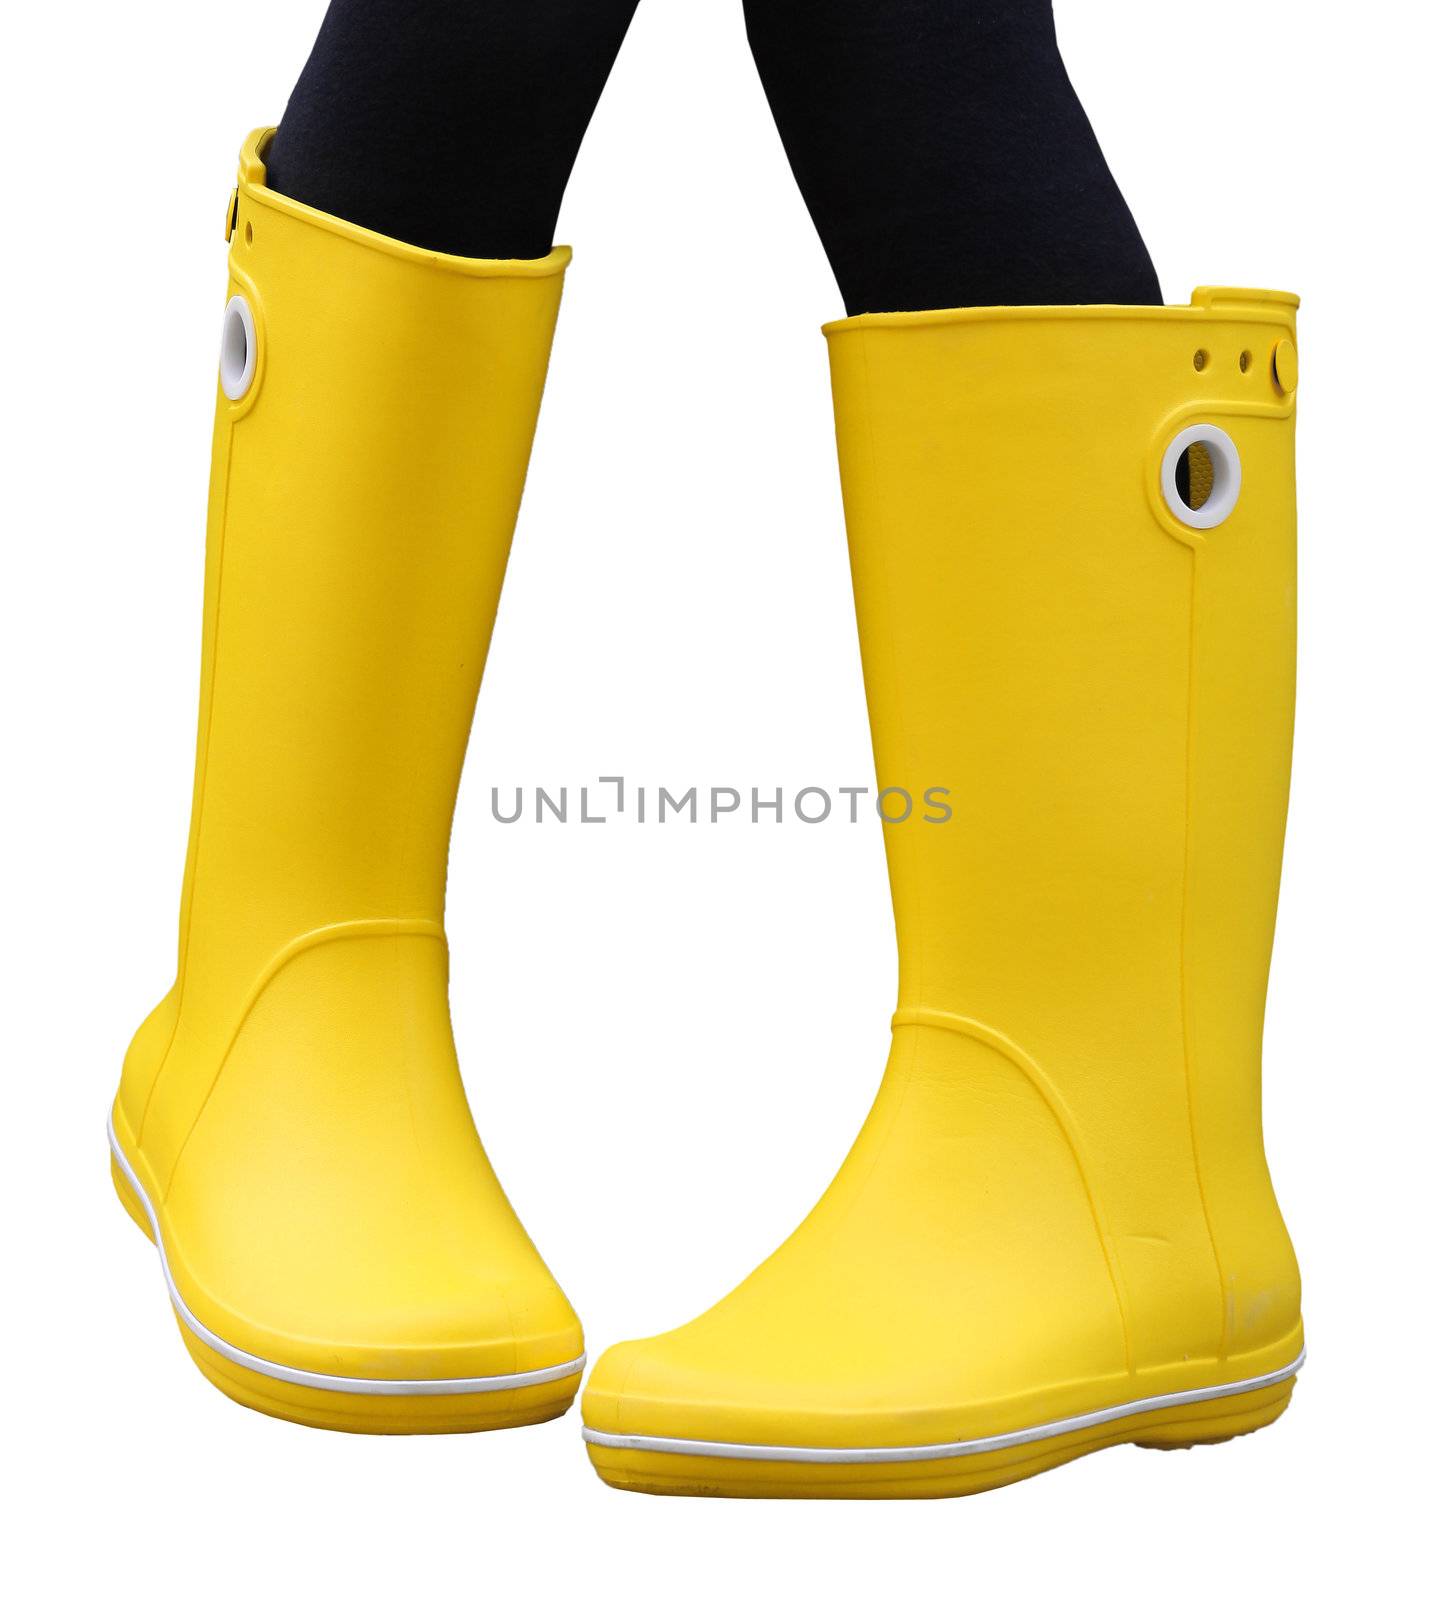 A pair of yellow rubber boots, isolated on white. With black legs